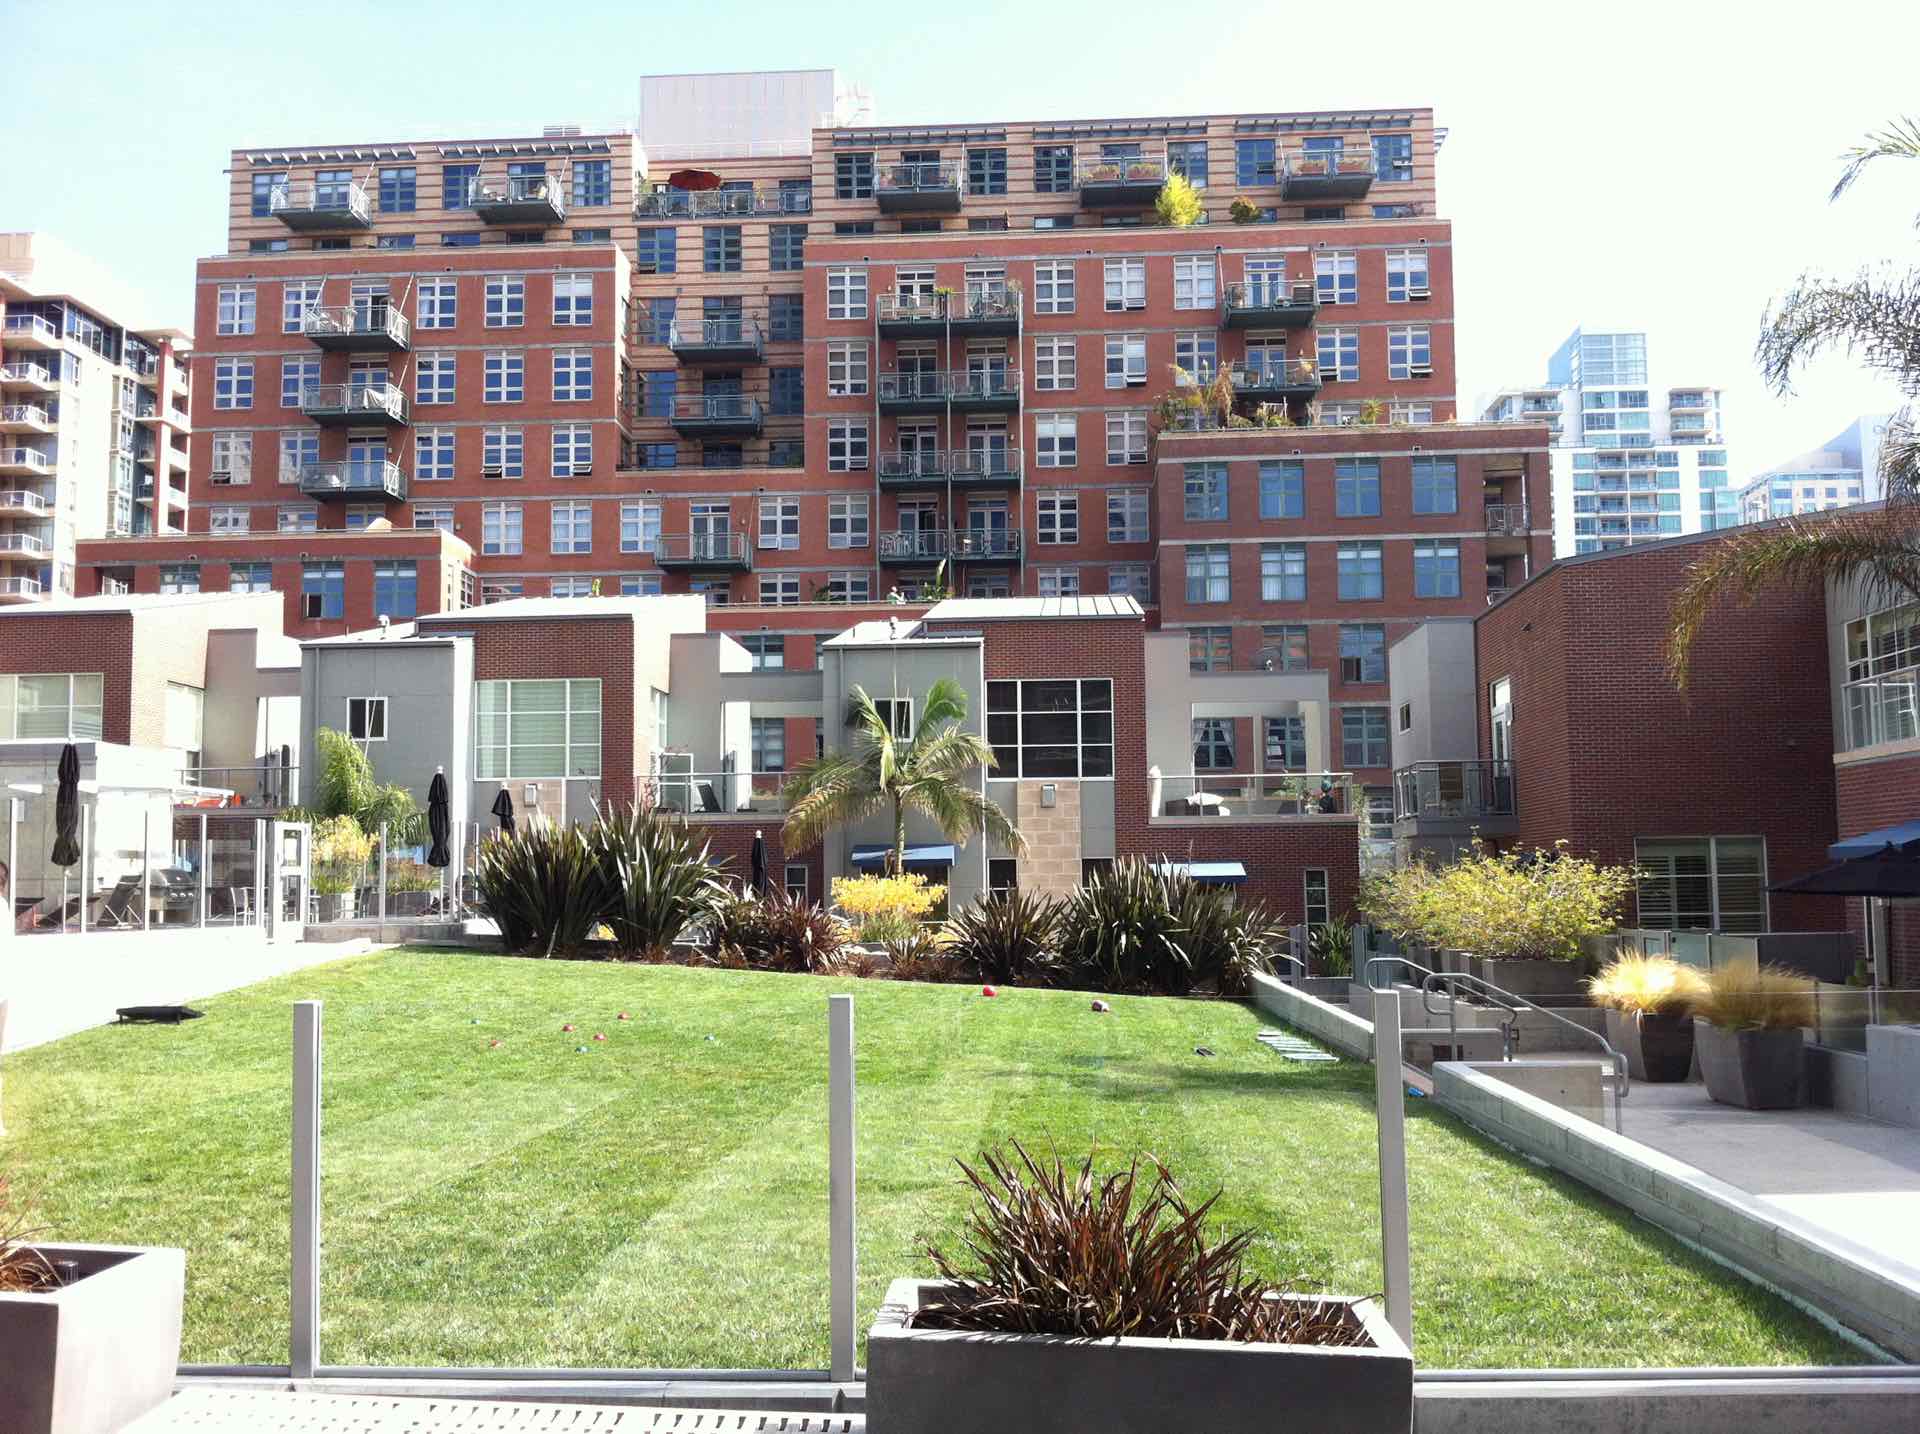 grassy area inside downtown San Diego condo tower